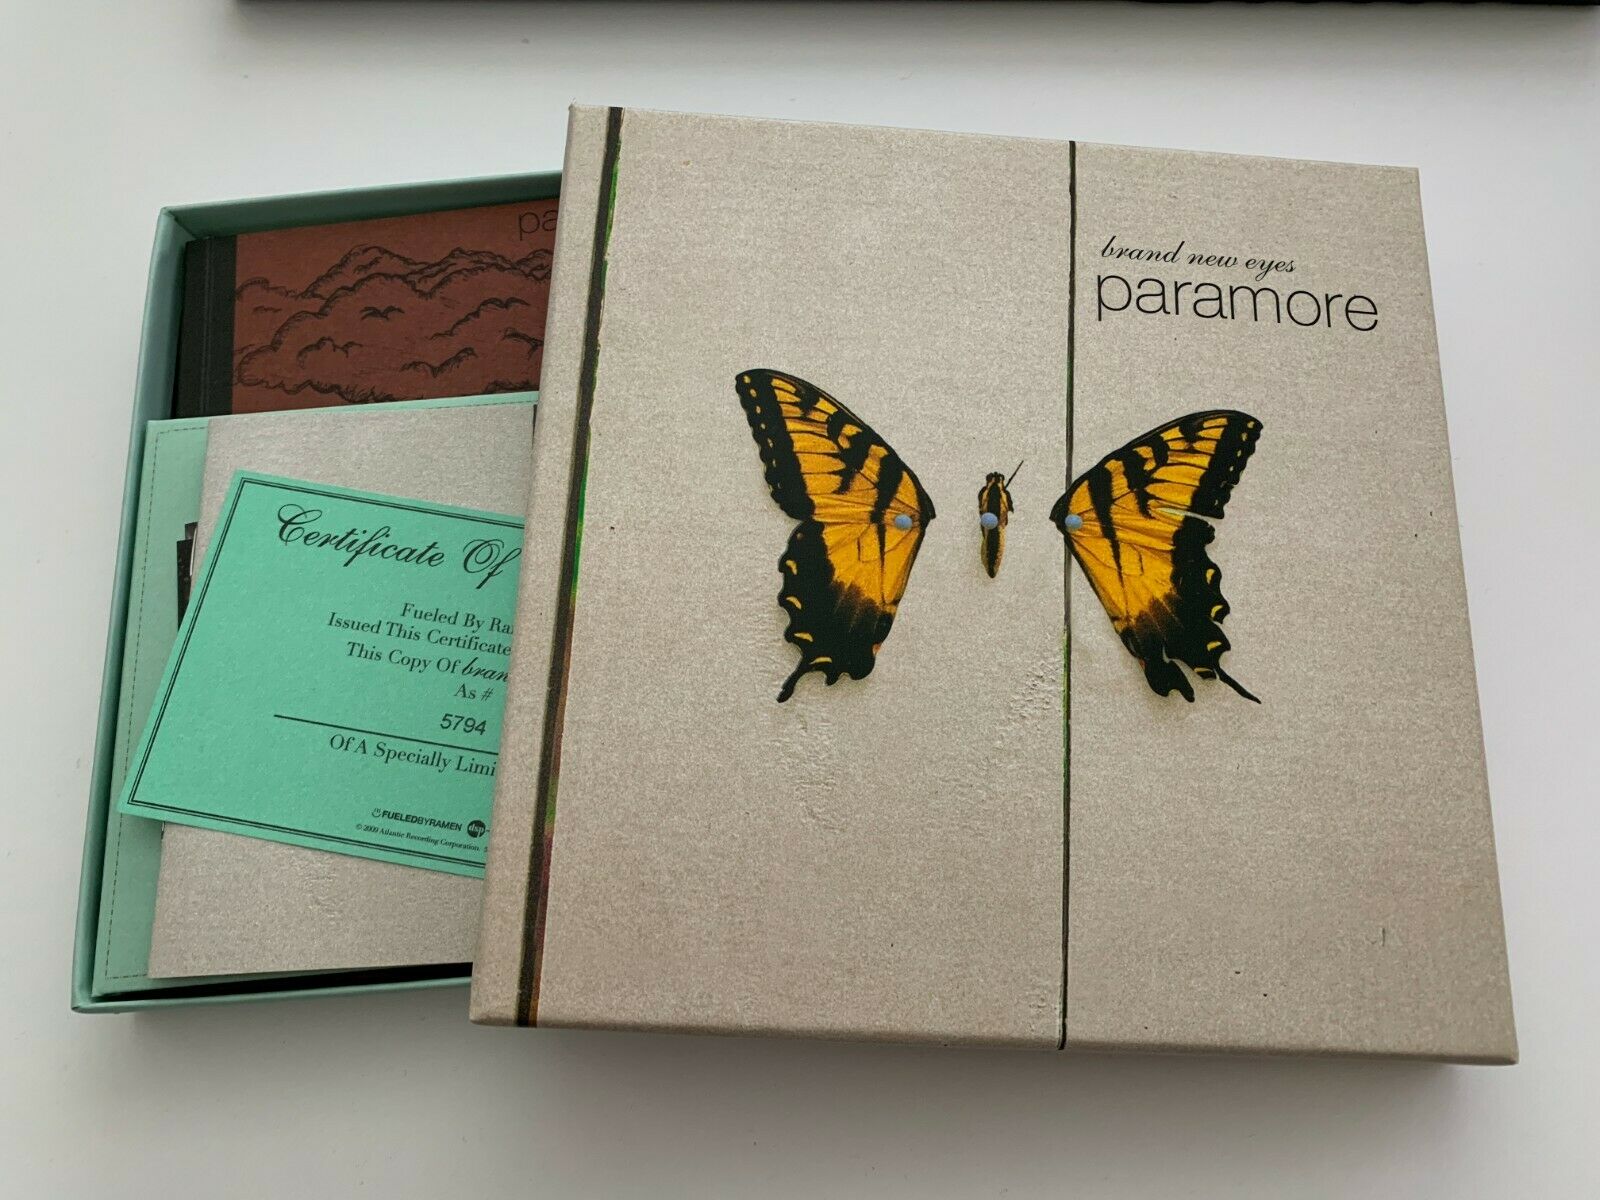 popsike.com - Paramore - Brand New Eyes (Limited Edition Box Set w